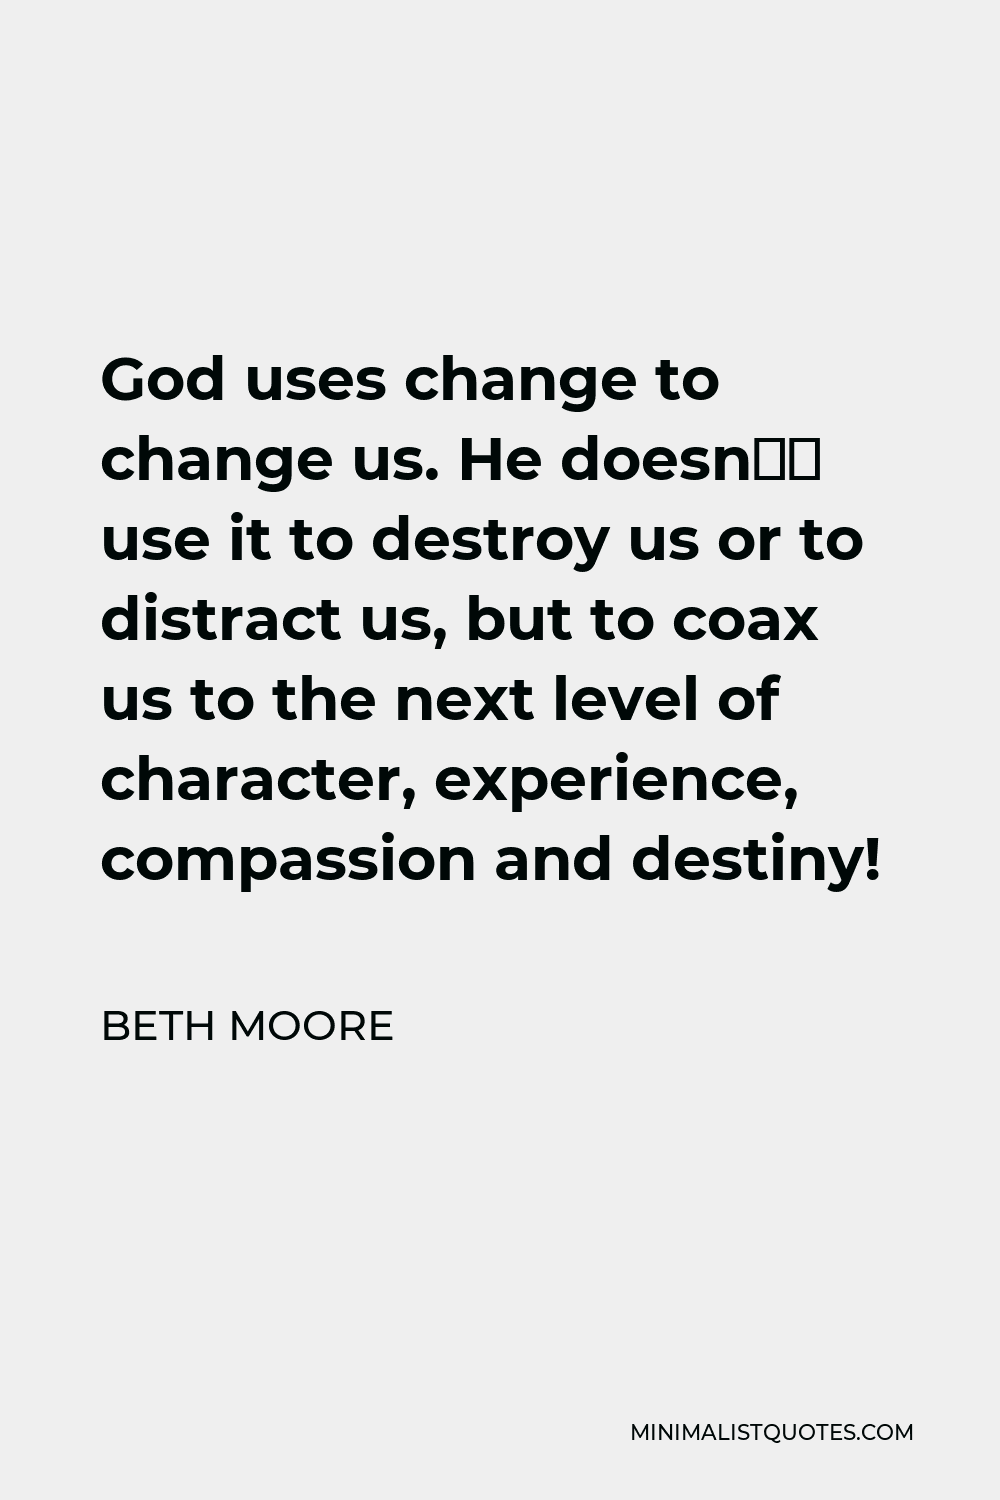 Beth Moore Quote - God uses change to change us. He doesn’t use it to destroy us or to distract us, but to coax us to the next level of character, experience, compassion and destiny!